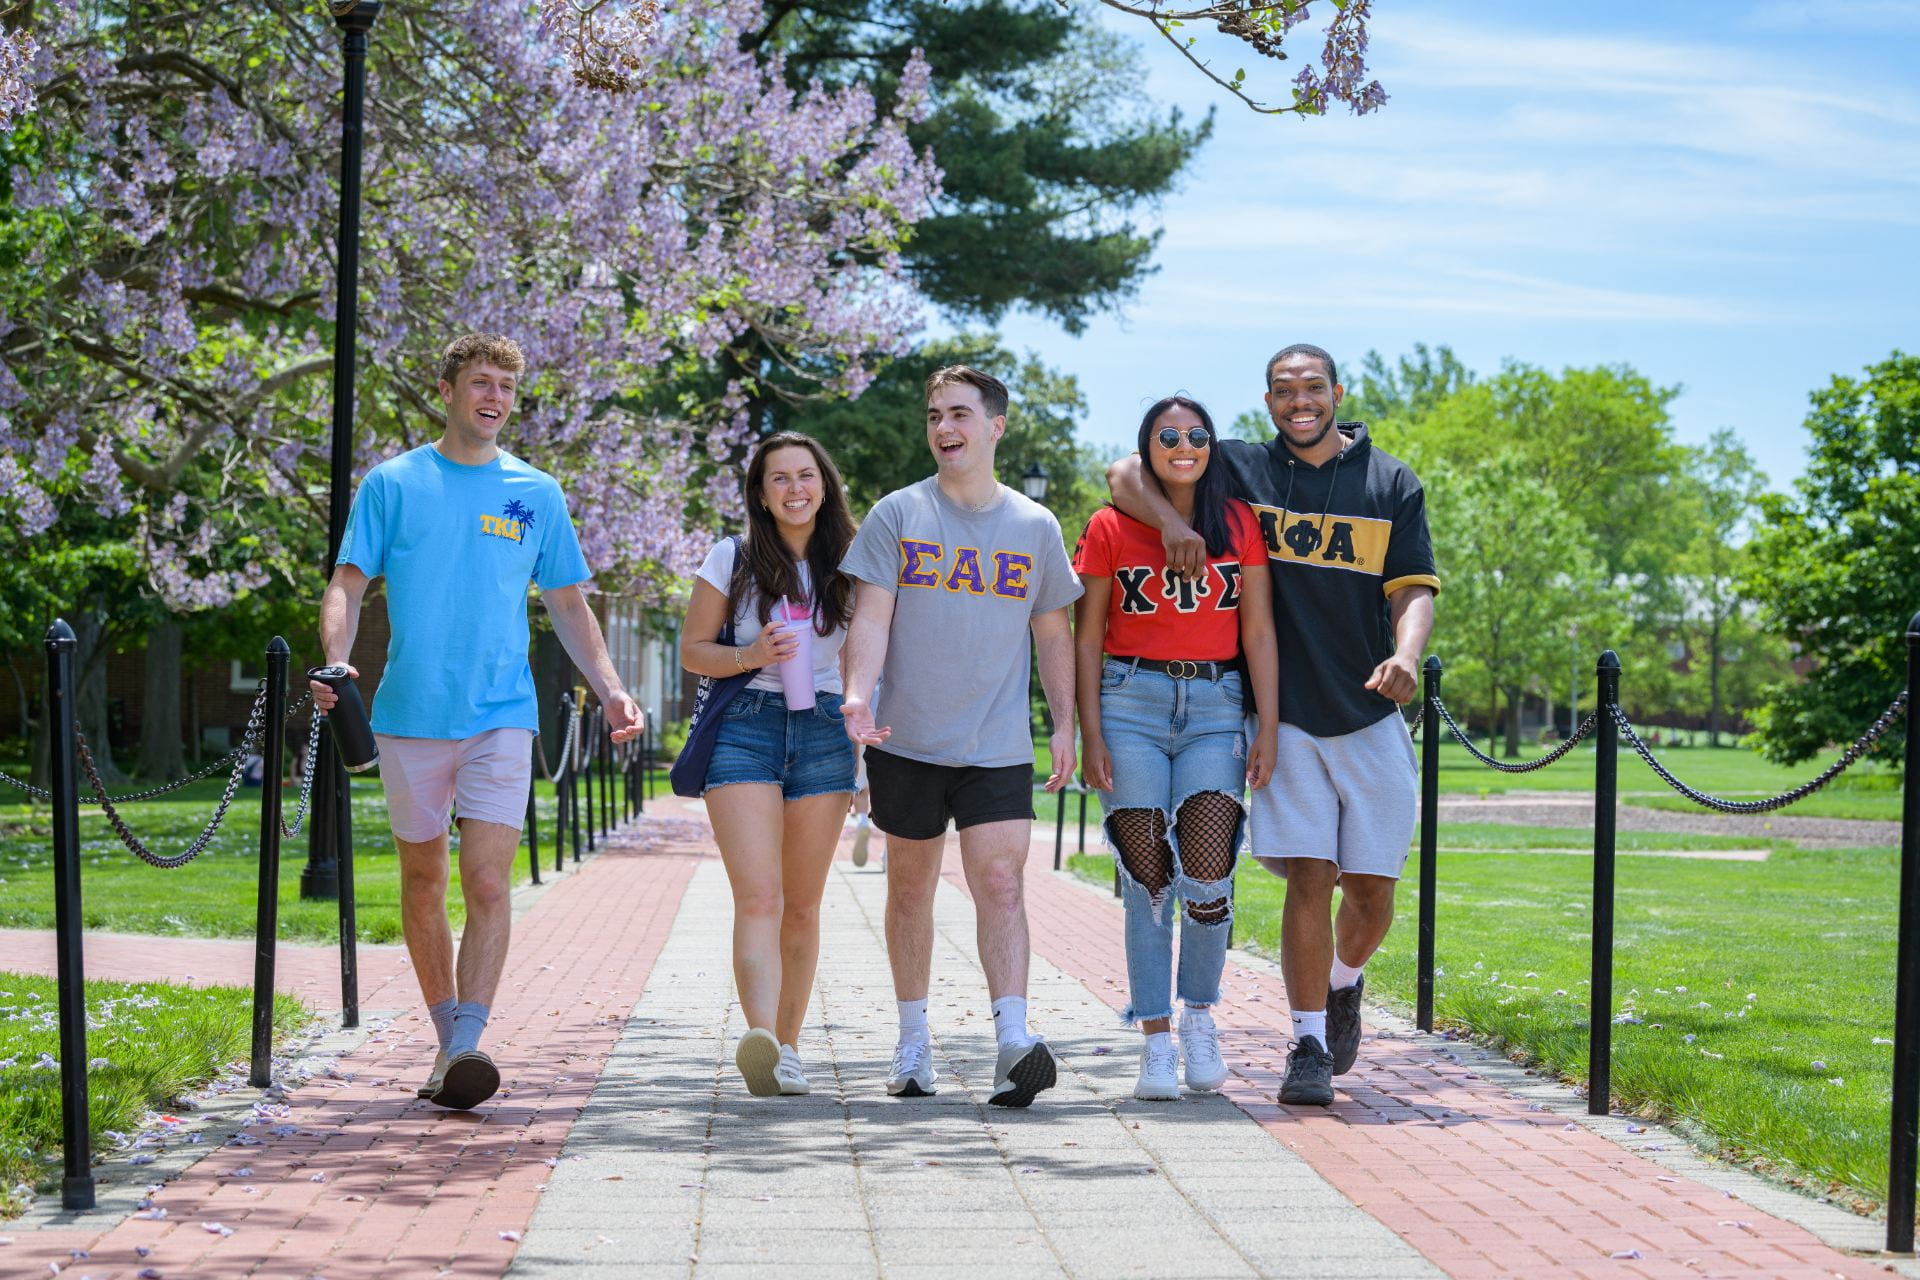 Students in fraternity and sorority letter t-shirts walking and smiling on a sunny day